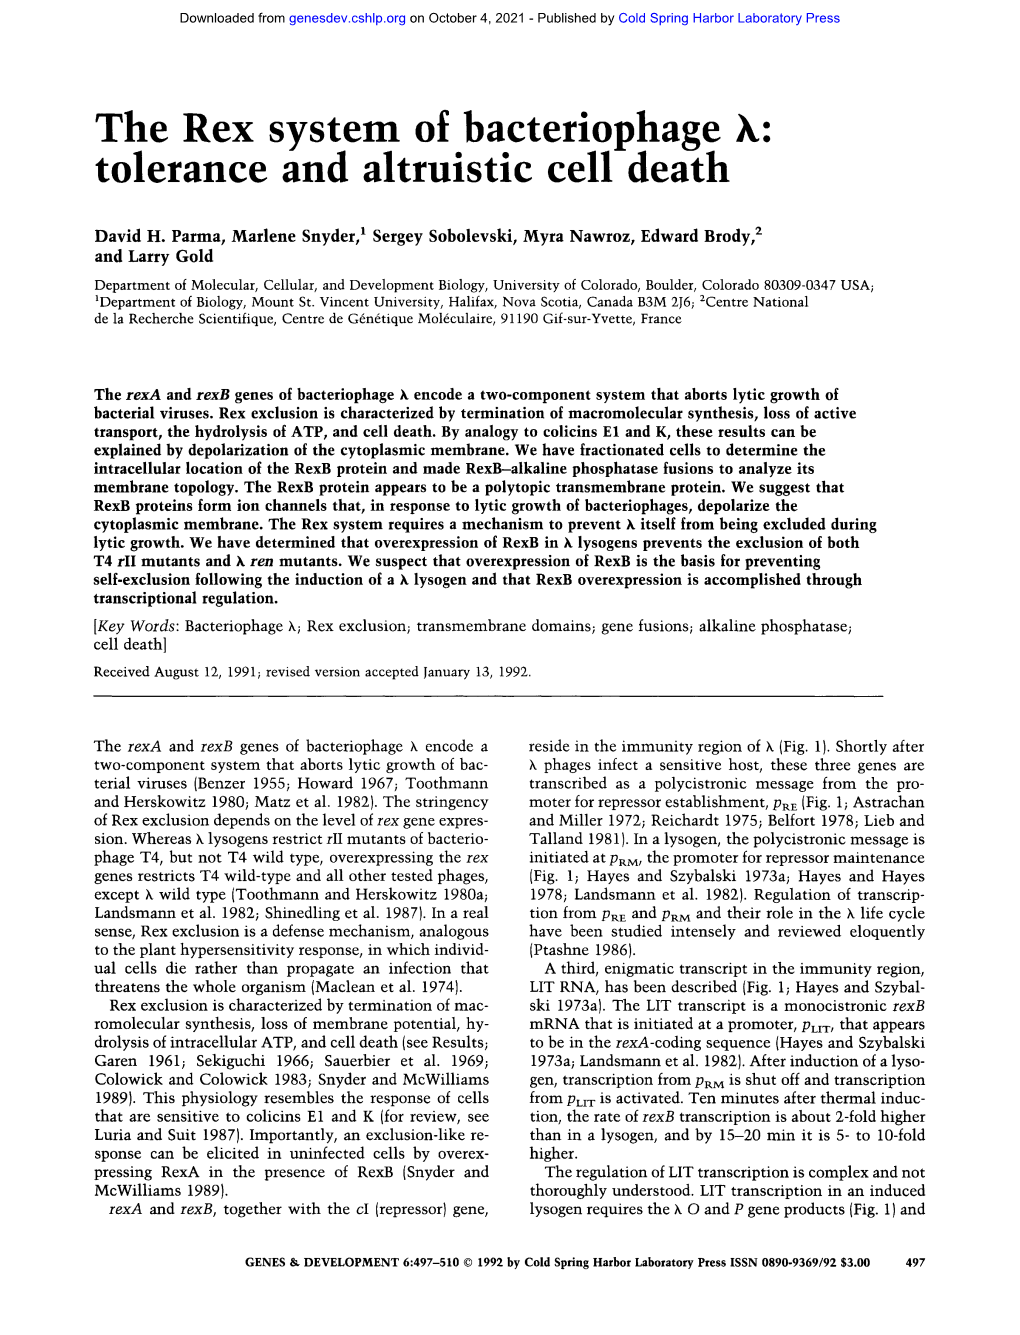 The Rex System of Bacteriophage K: Tolerance and Altruistic Cell Death